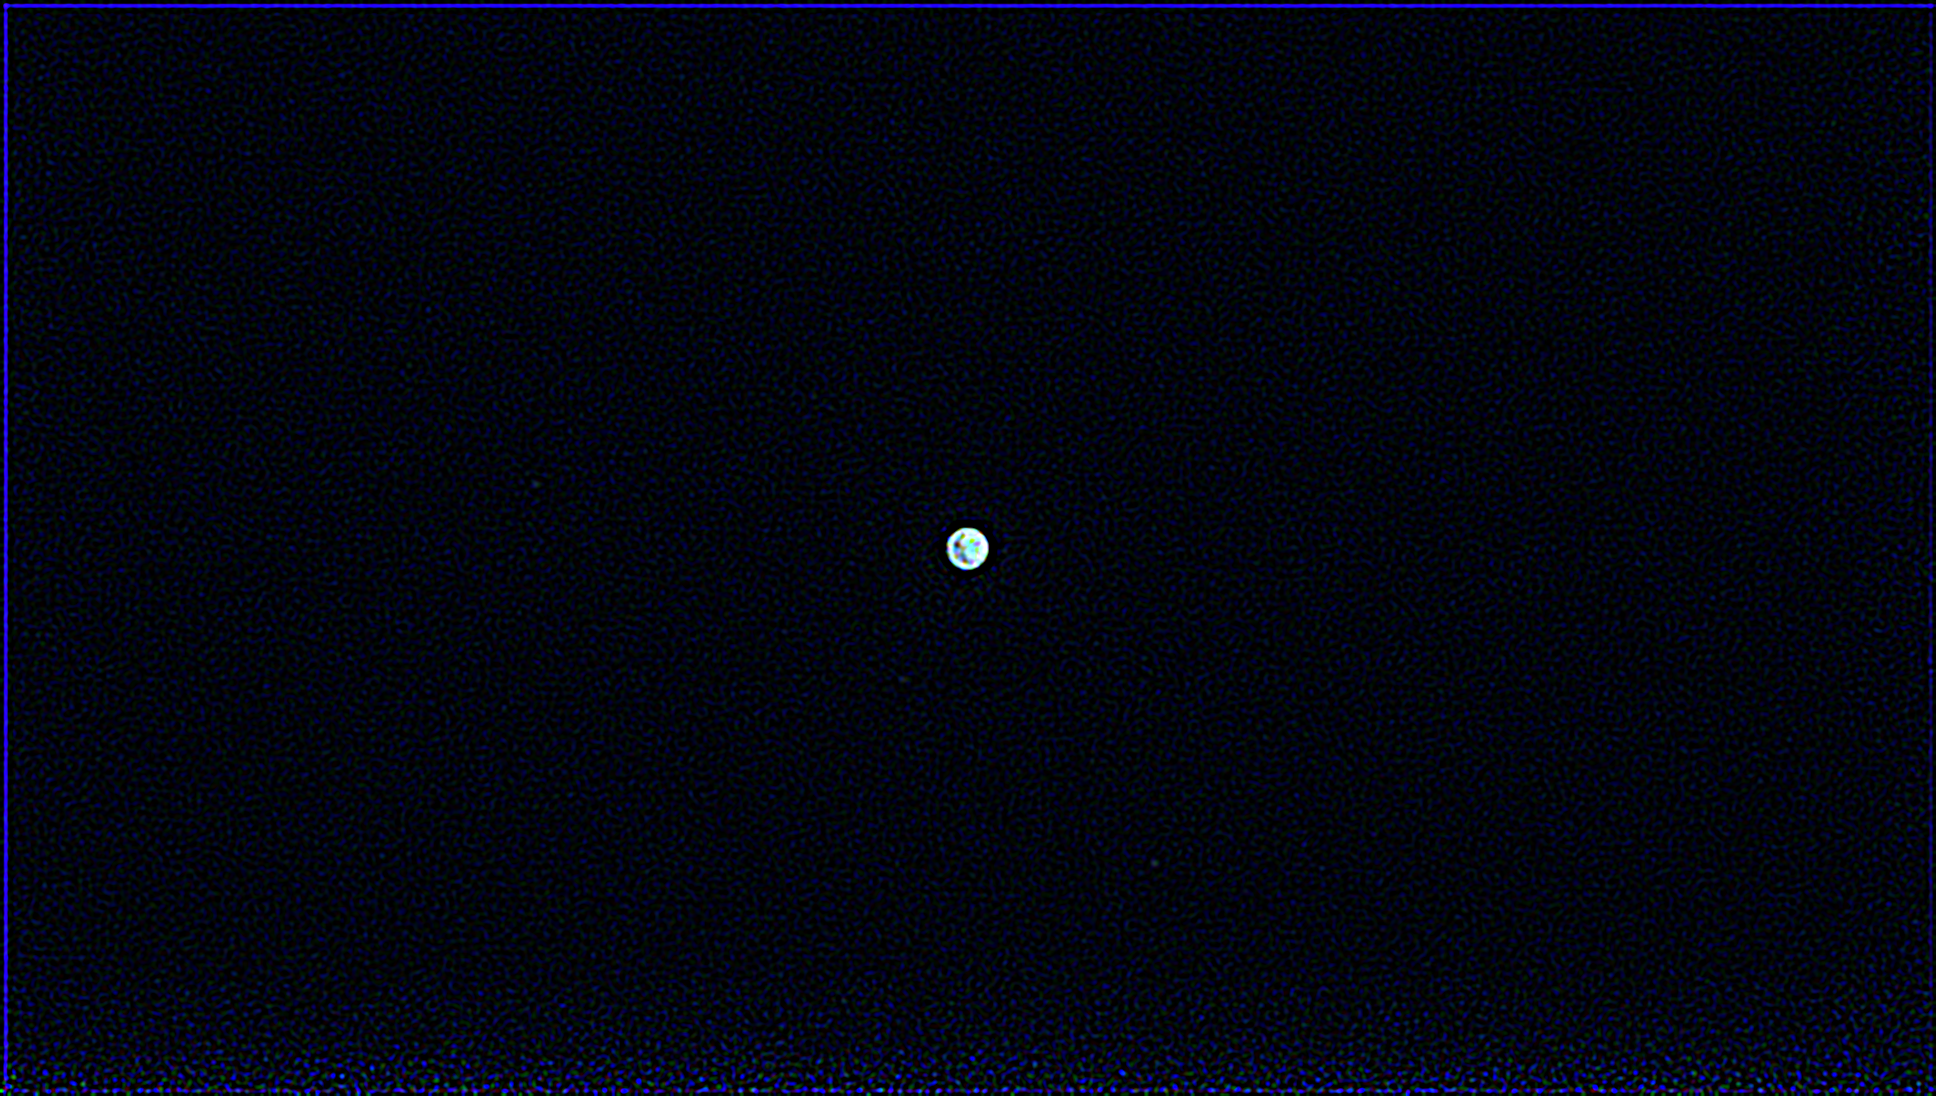 2022-11-09-2137_3-610n-Jupiter_lapl5_ap5_b.png.19c7cbe3e69fa9c3dbe80f78a3f9fcae.png